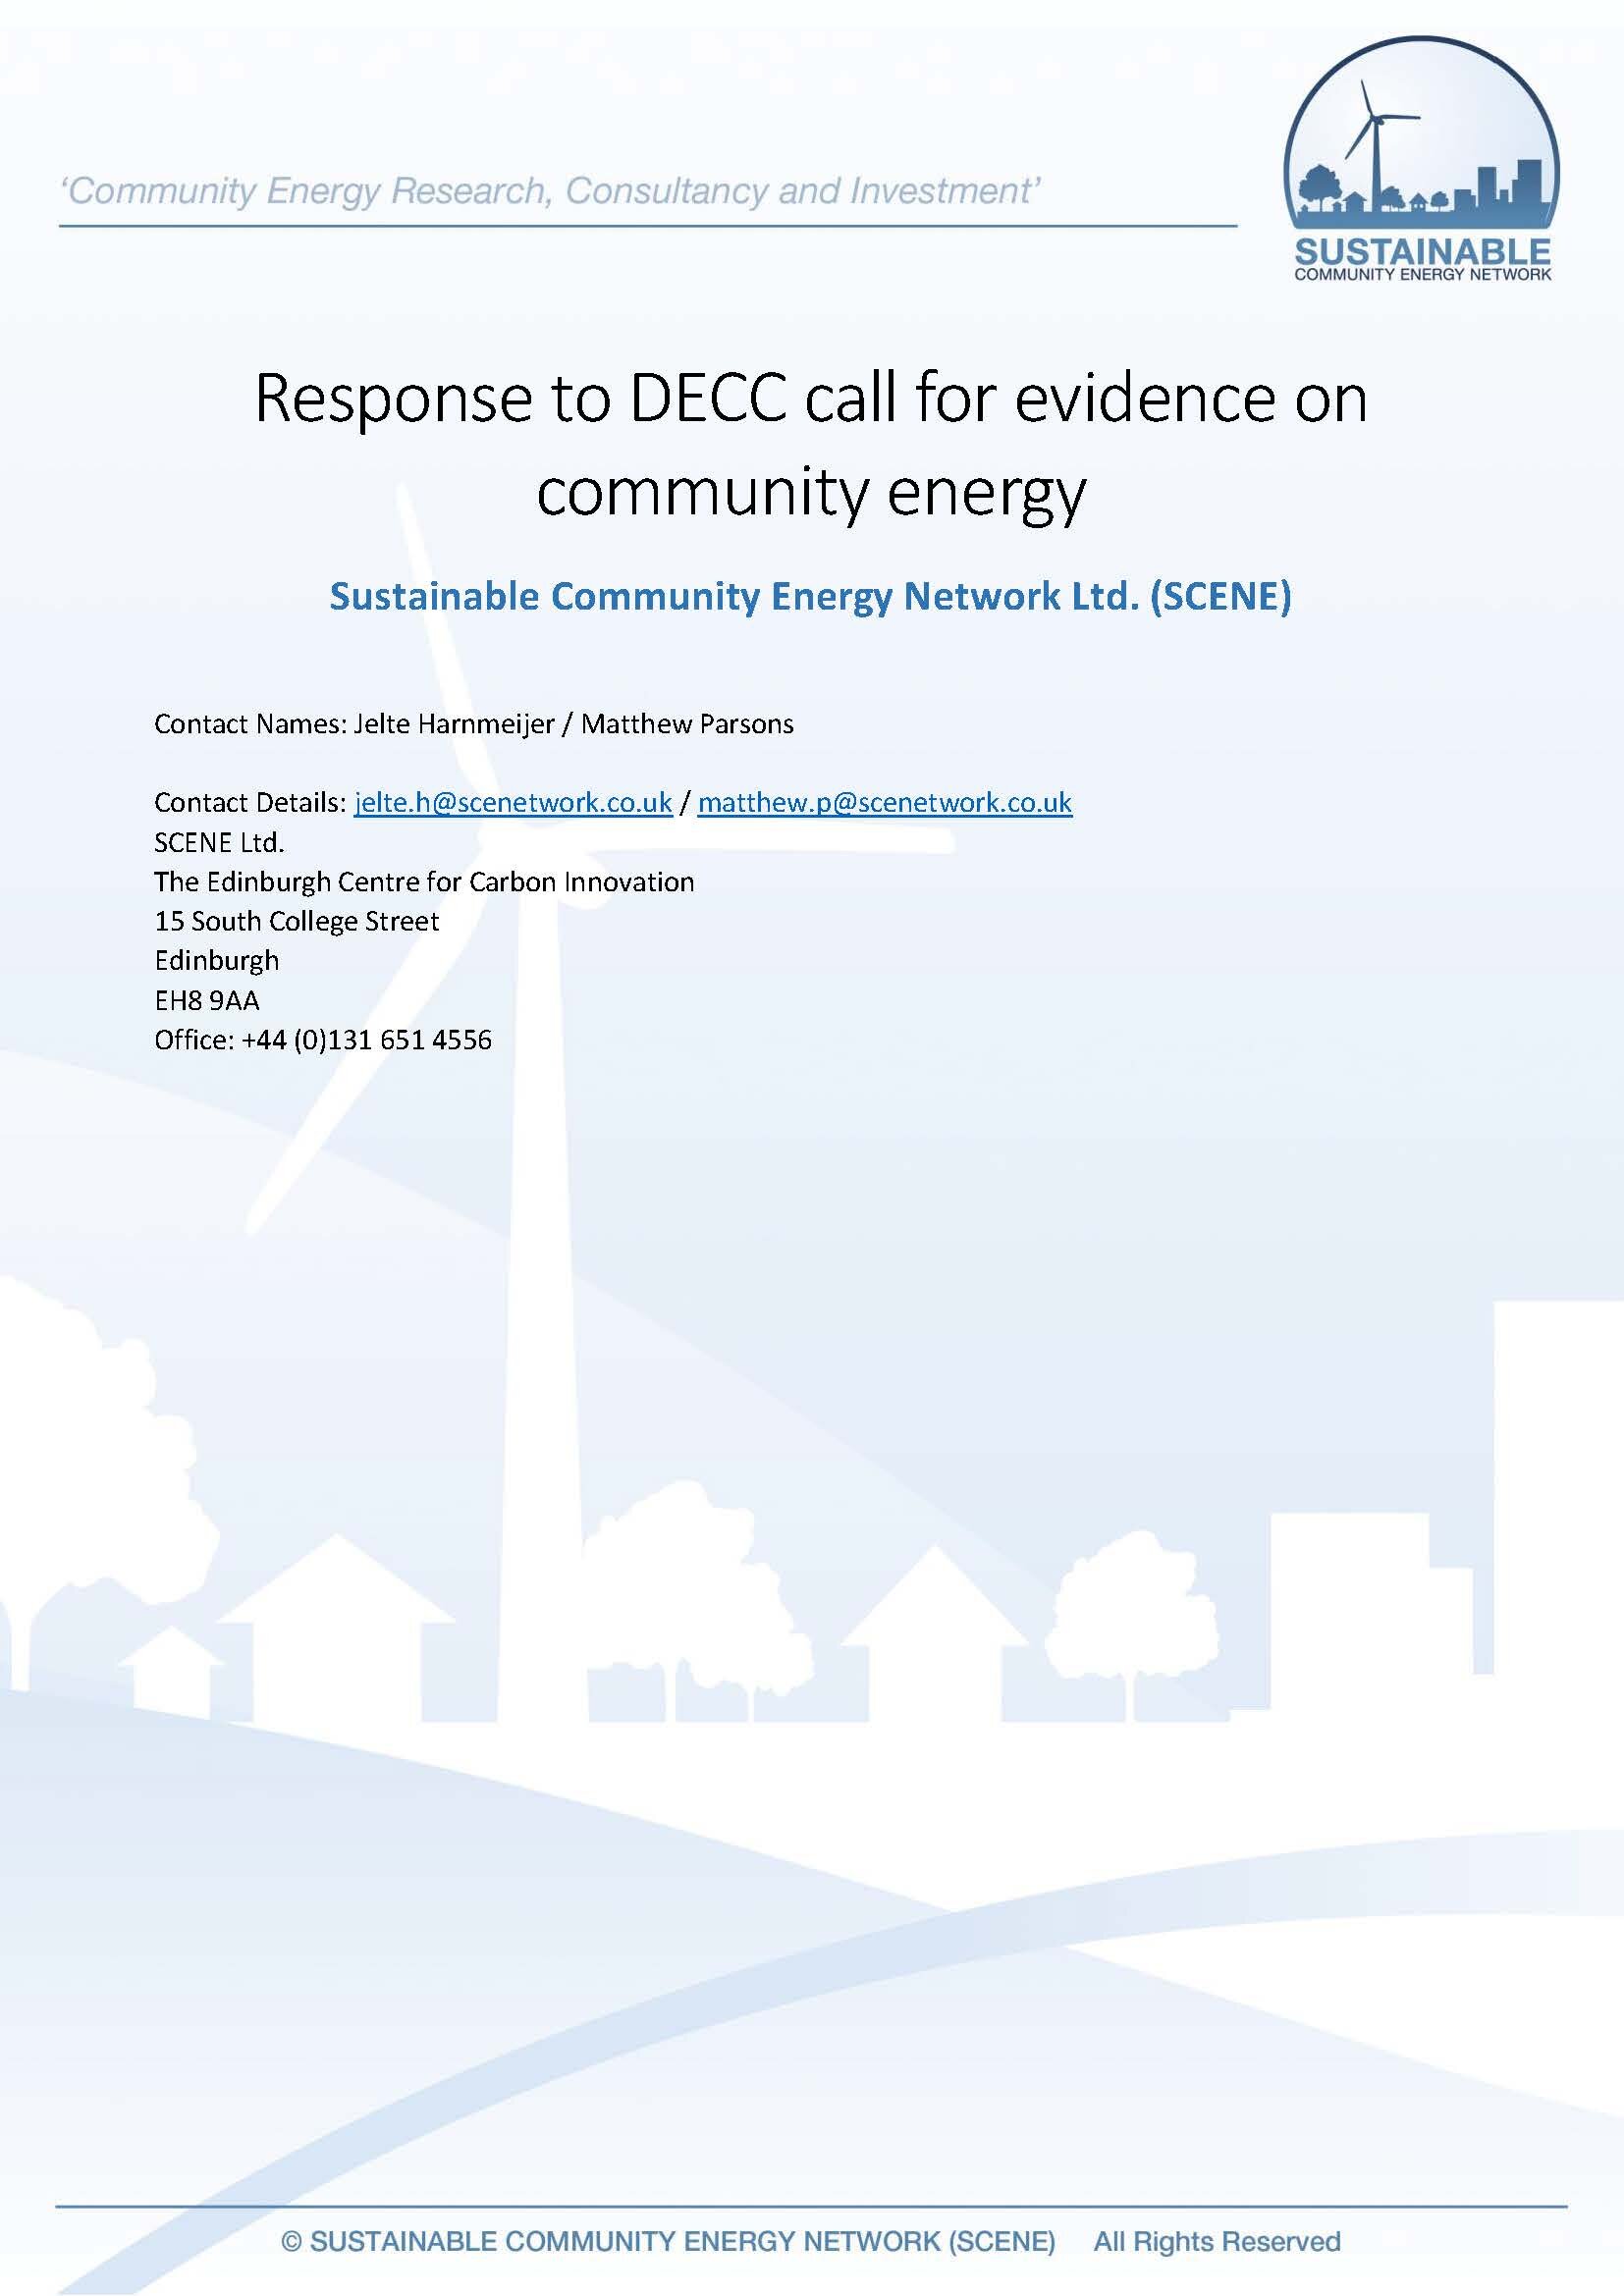 Response to Department for Energy and Climate Change Call for Evidence on Community Energy (July 2013)